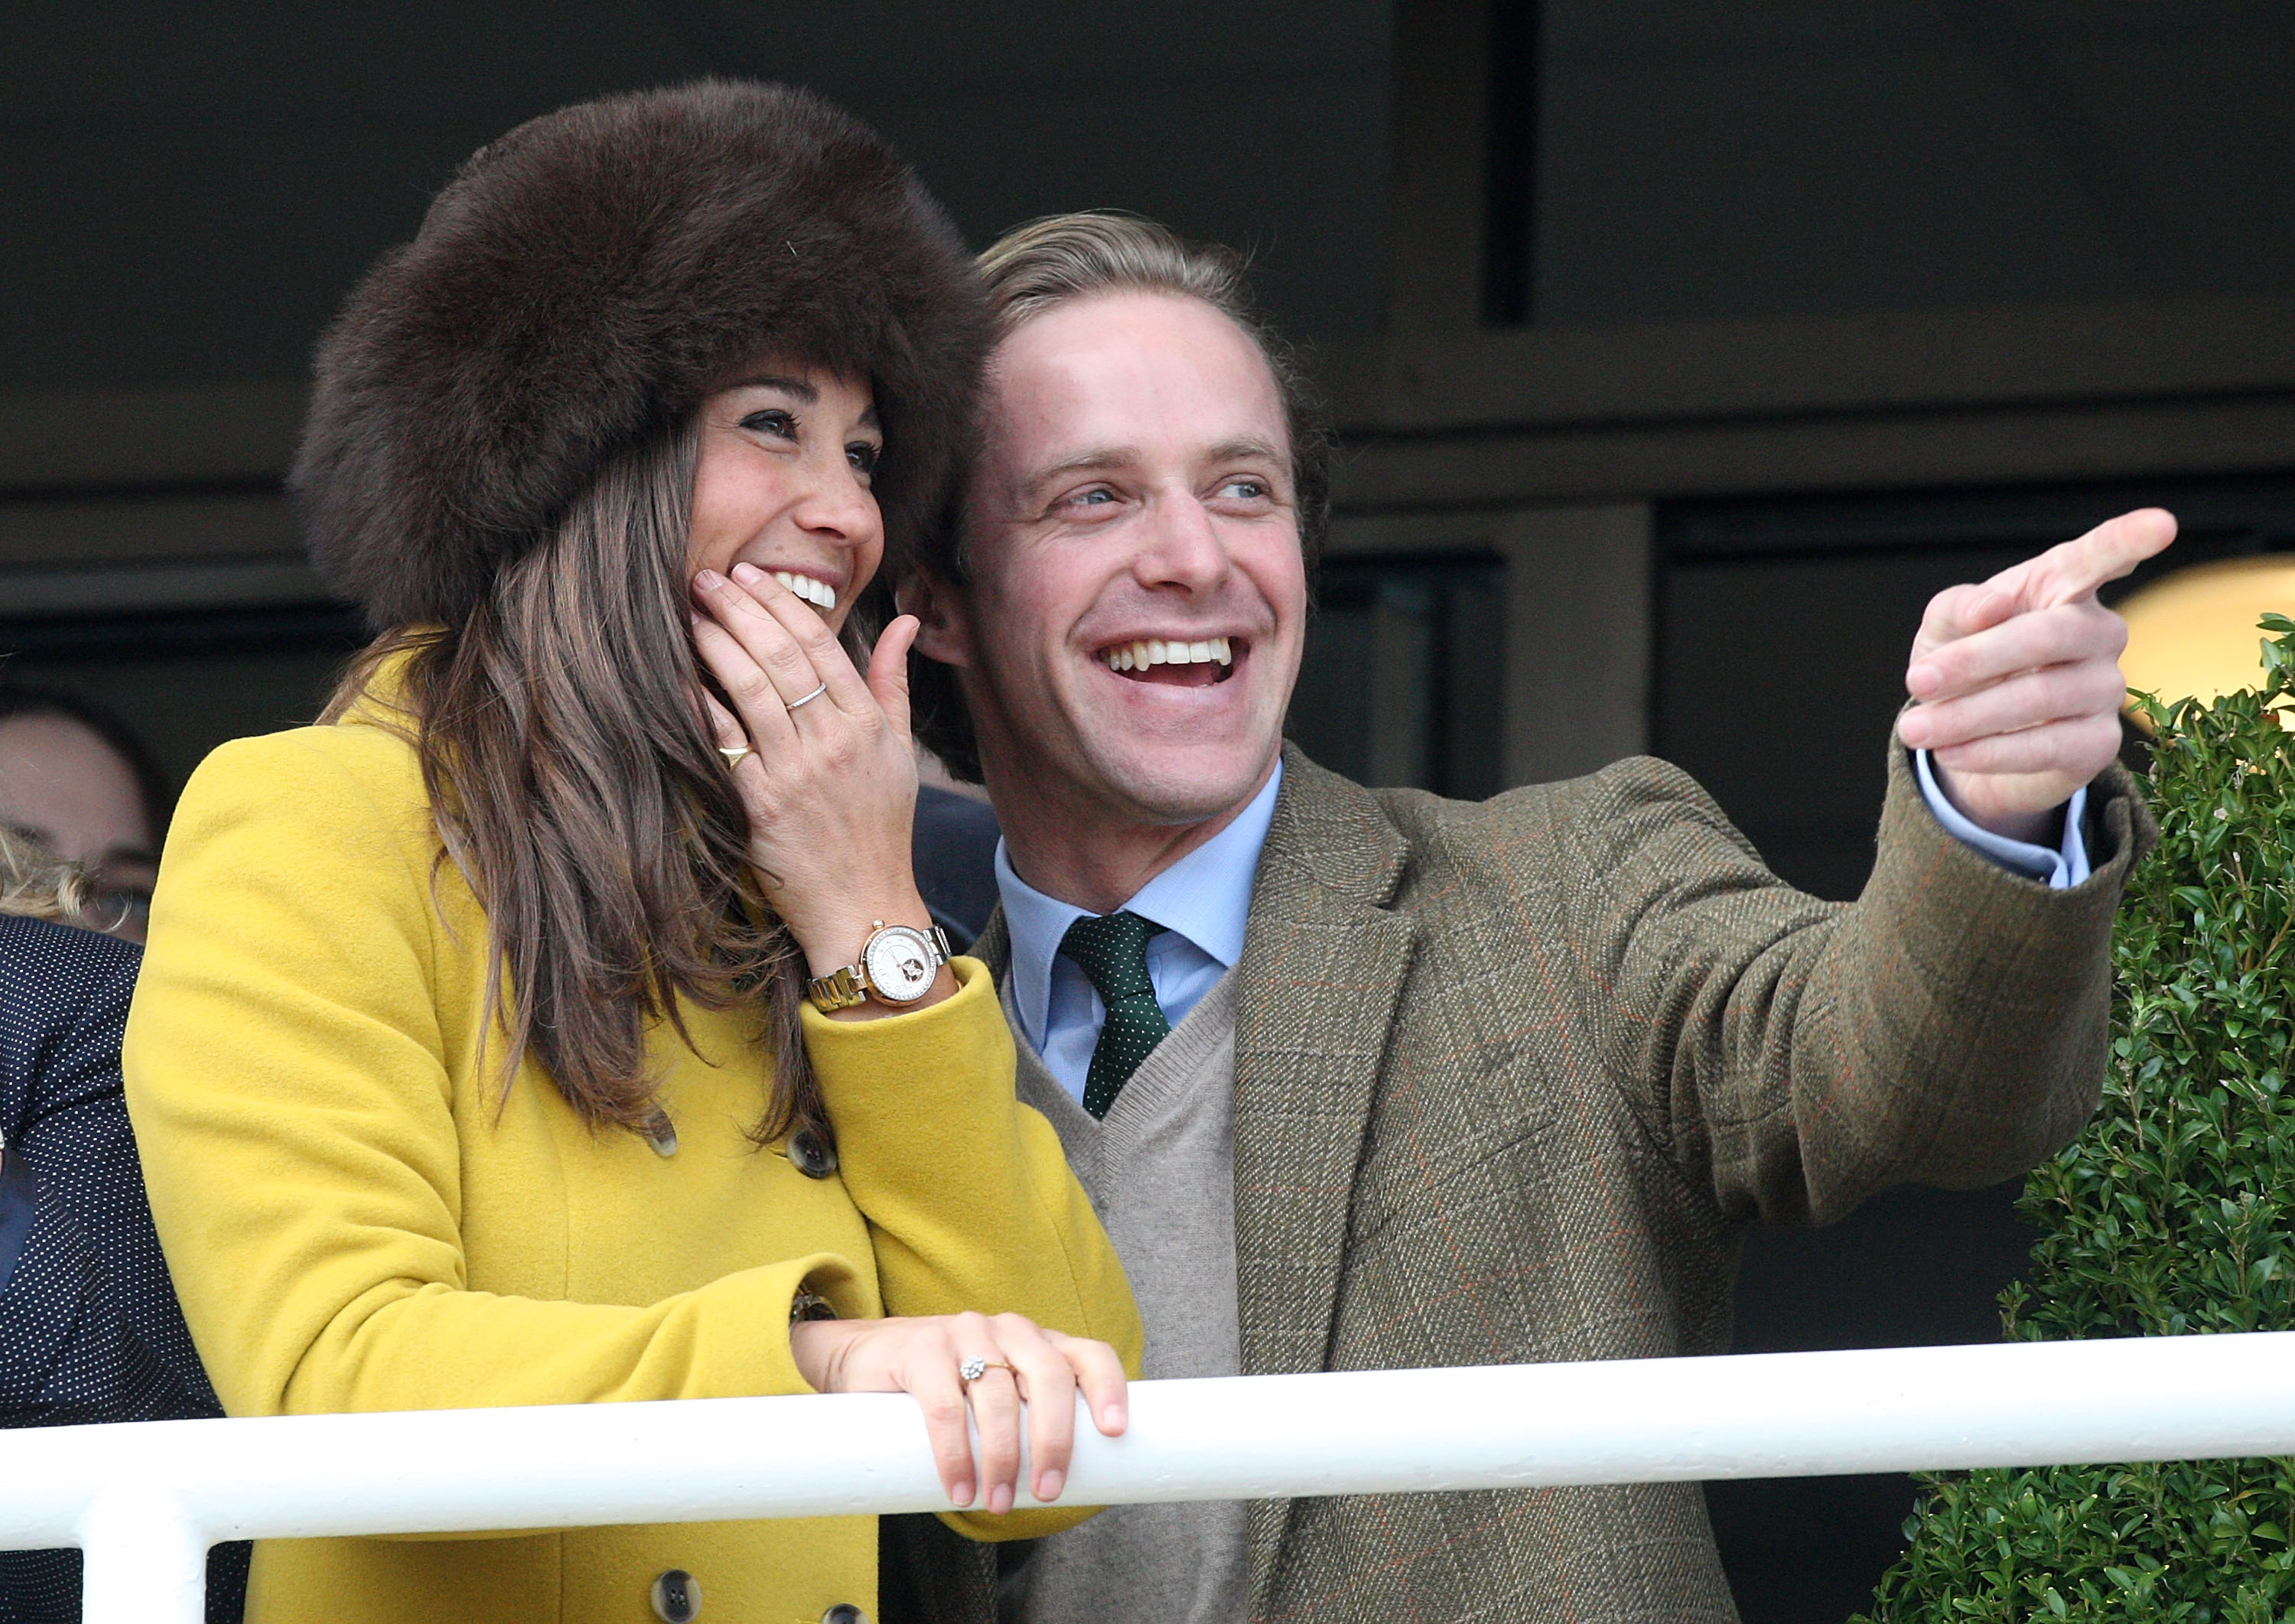 Pippa Middleton and Thomas Kingston at The Cheltenham Festival in Cheltenham, England on March 14, 2013 | Source: Getty Images